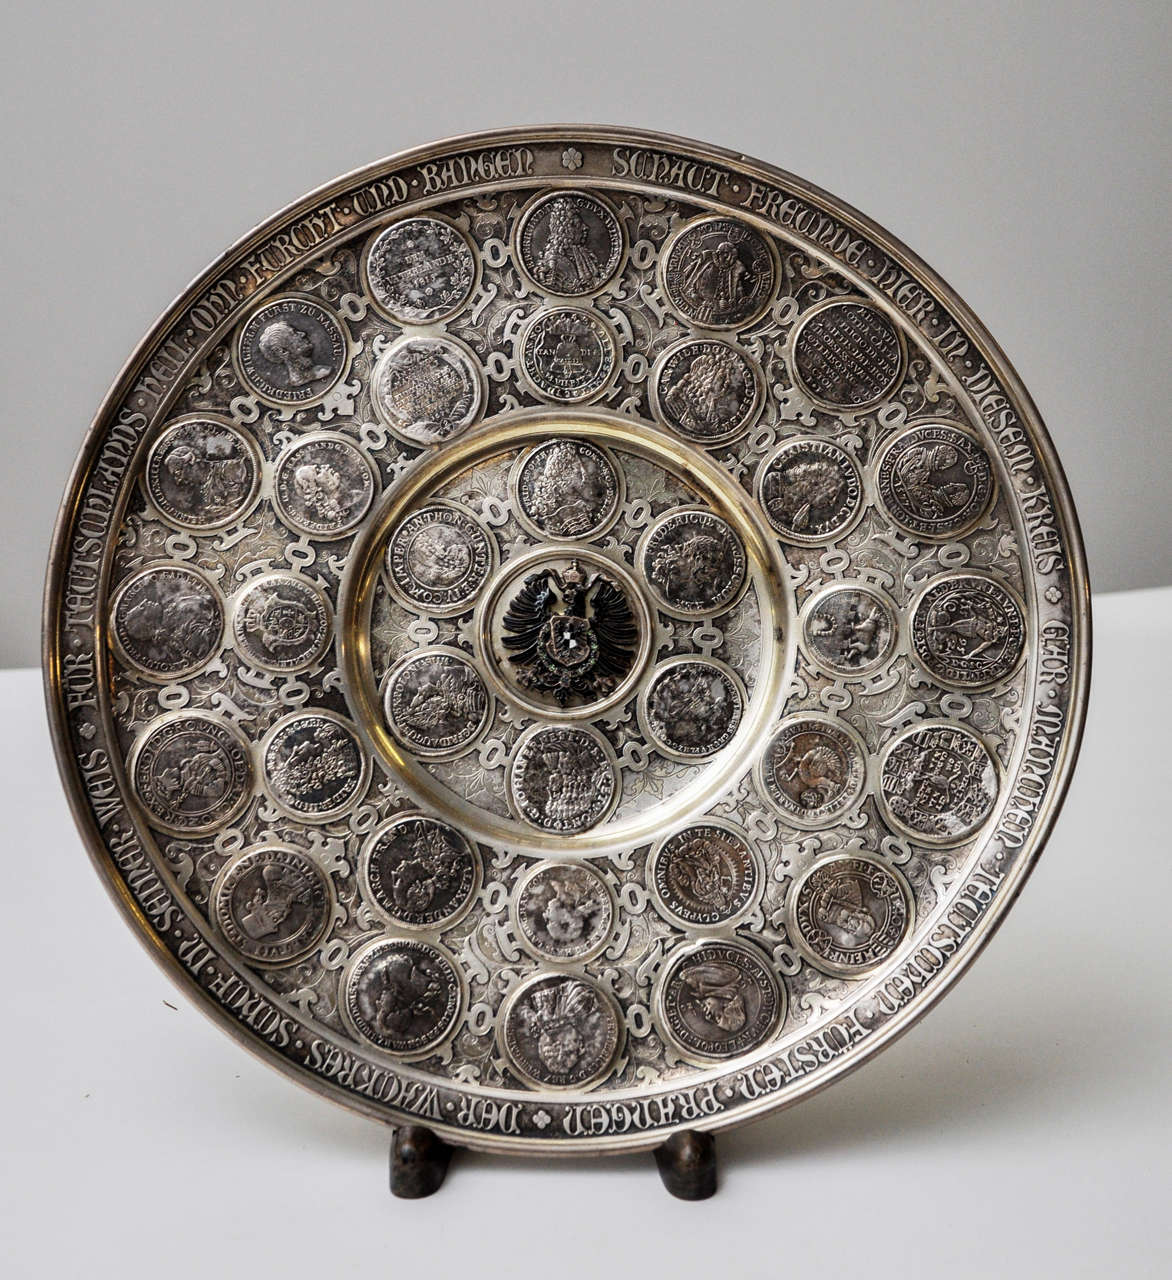 A German Silver Sy & Wagner Platter, Berlin, Circa 1890
Inset with various 16th through 19th century European coins, center has an enamelled crest.
Marked 